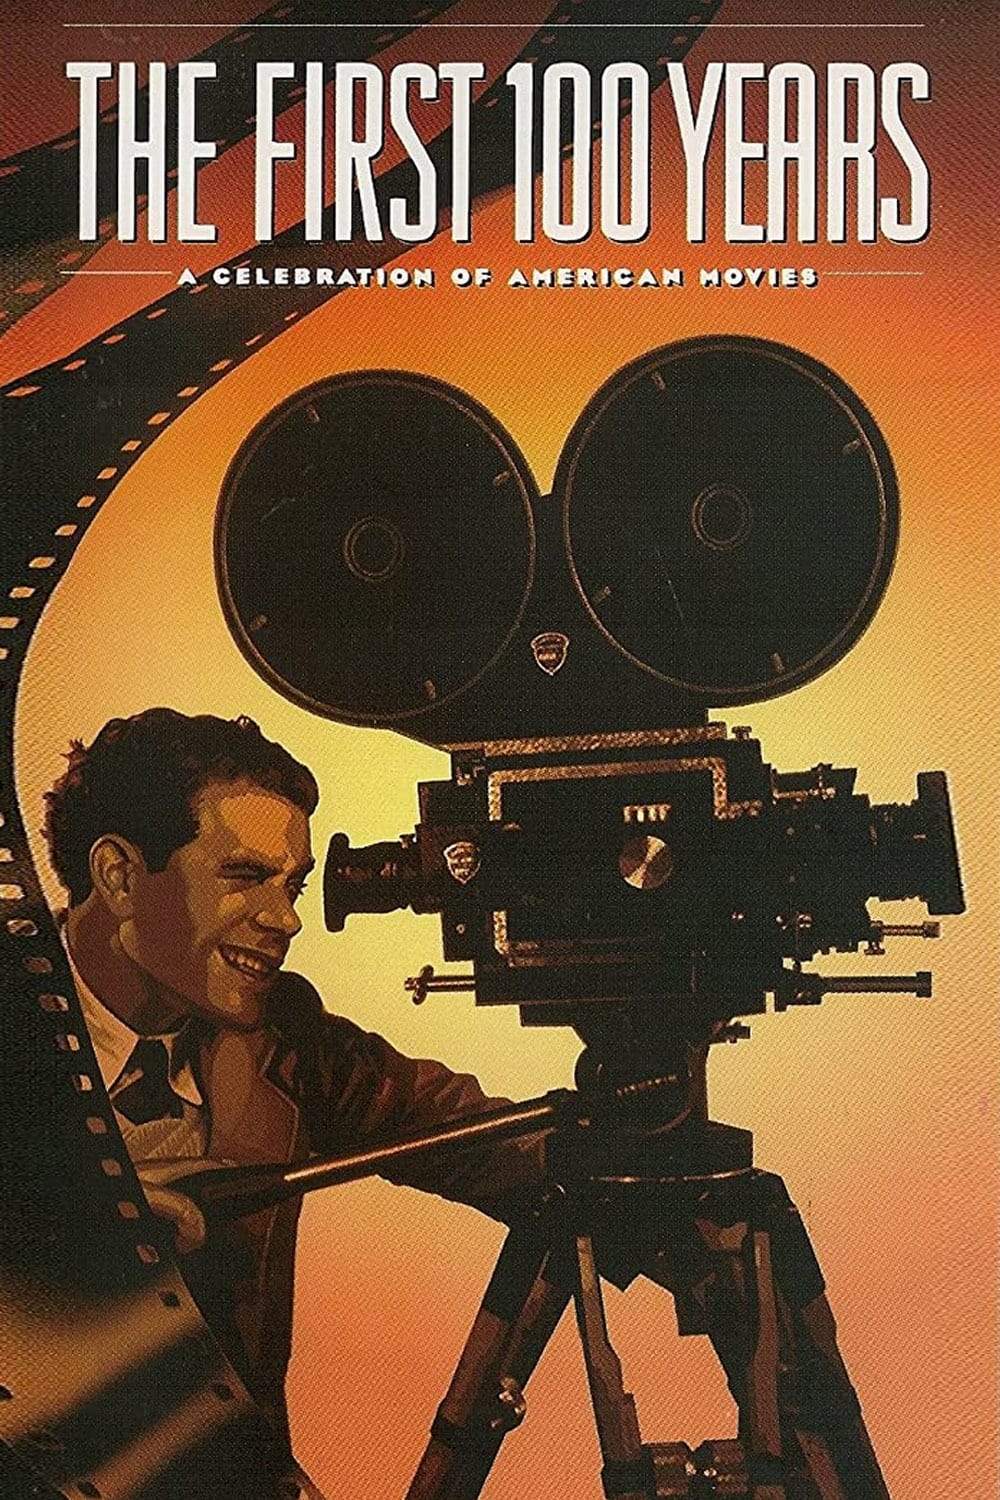 The First 100 Years: A Celebration of American Movies (1995)